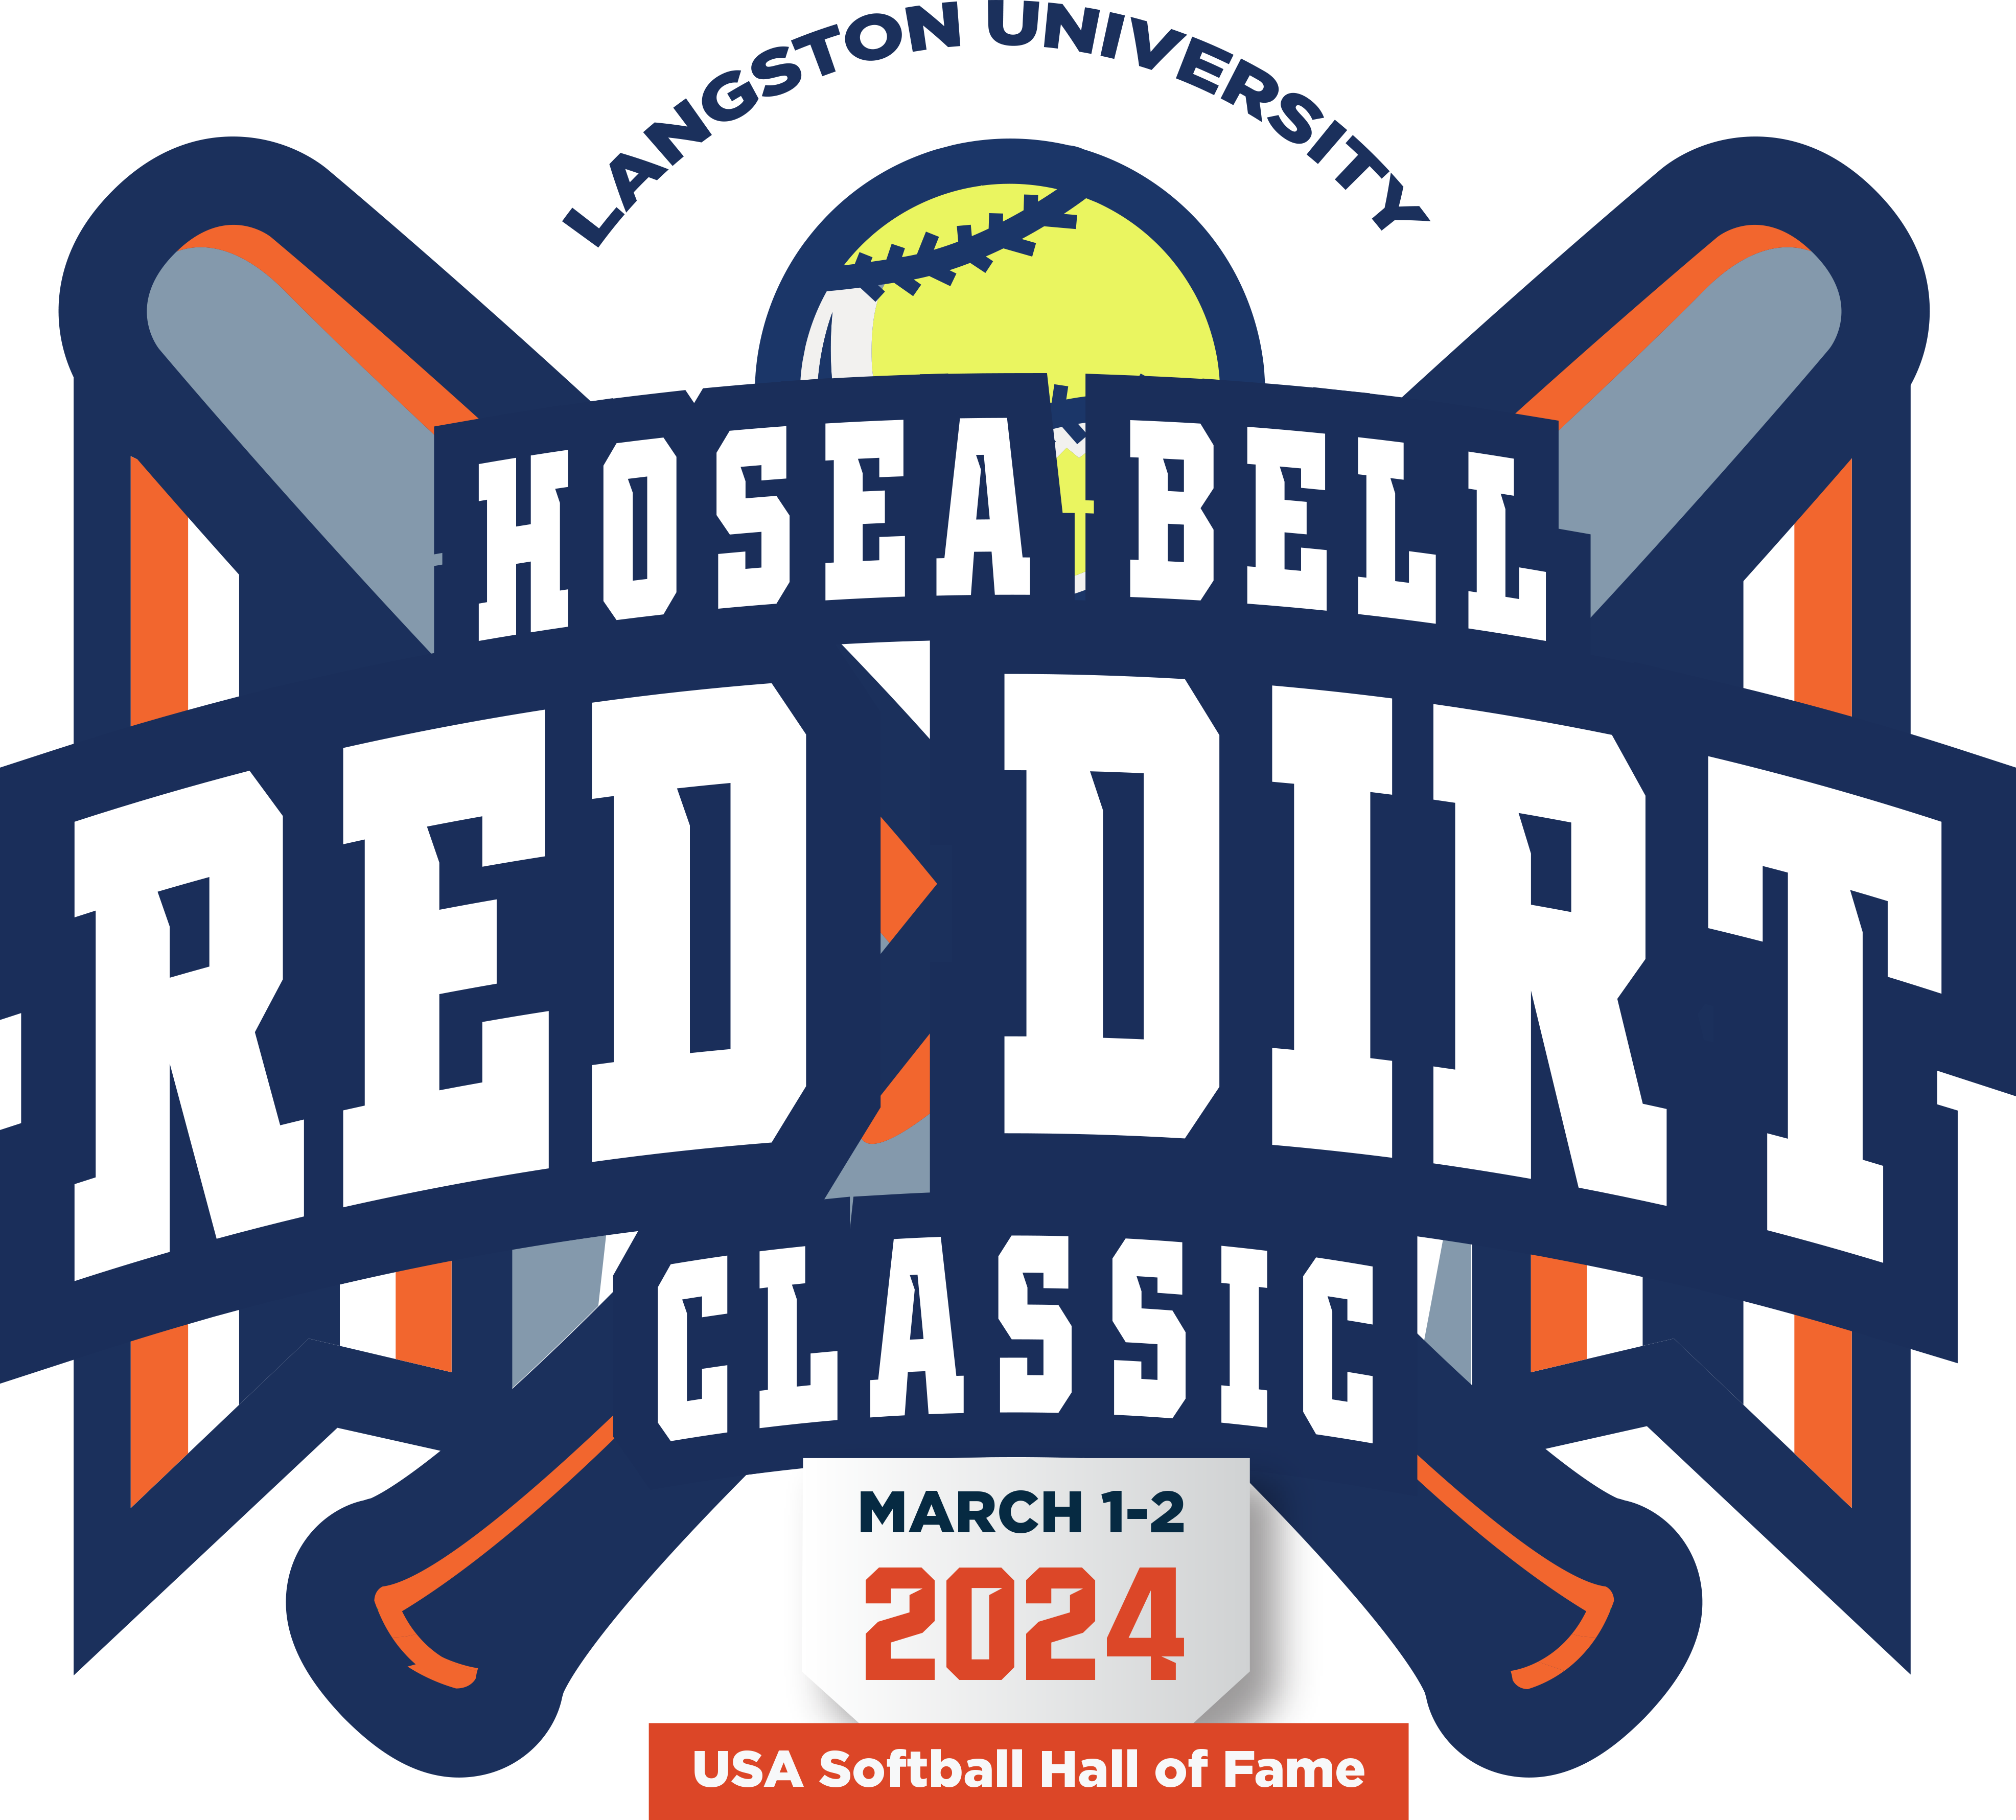 2024 Hall of Fame Complex Event Schedule Kicks Off with Langston Hosea Bell Red Dirt Classic featured image